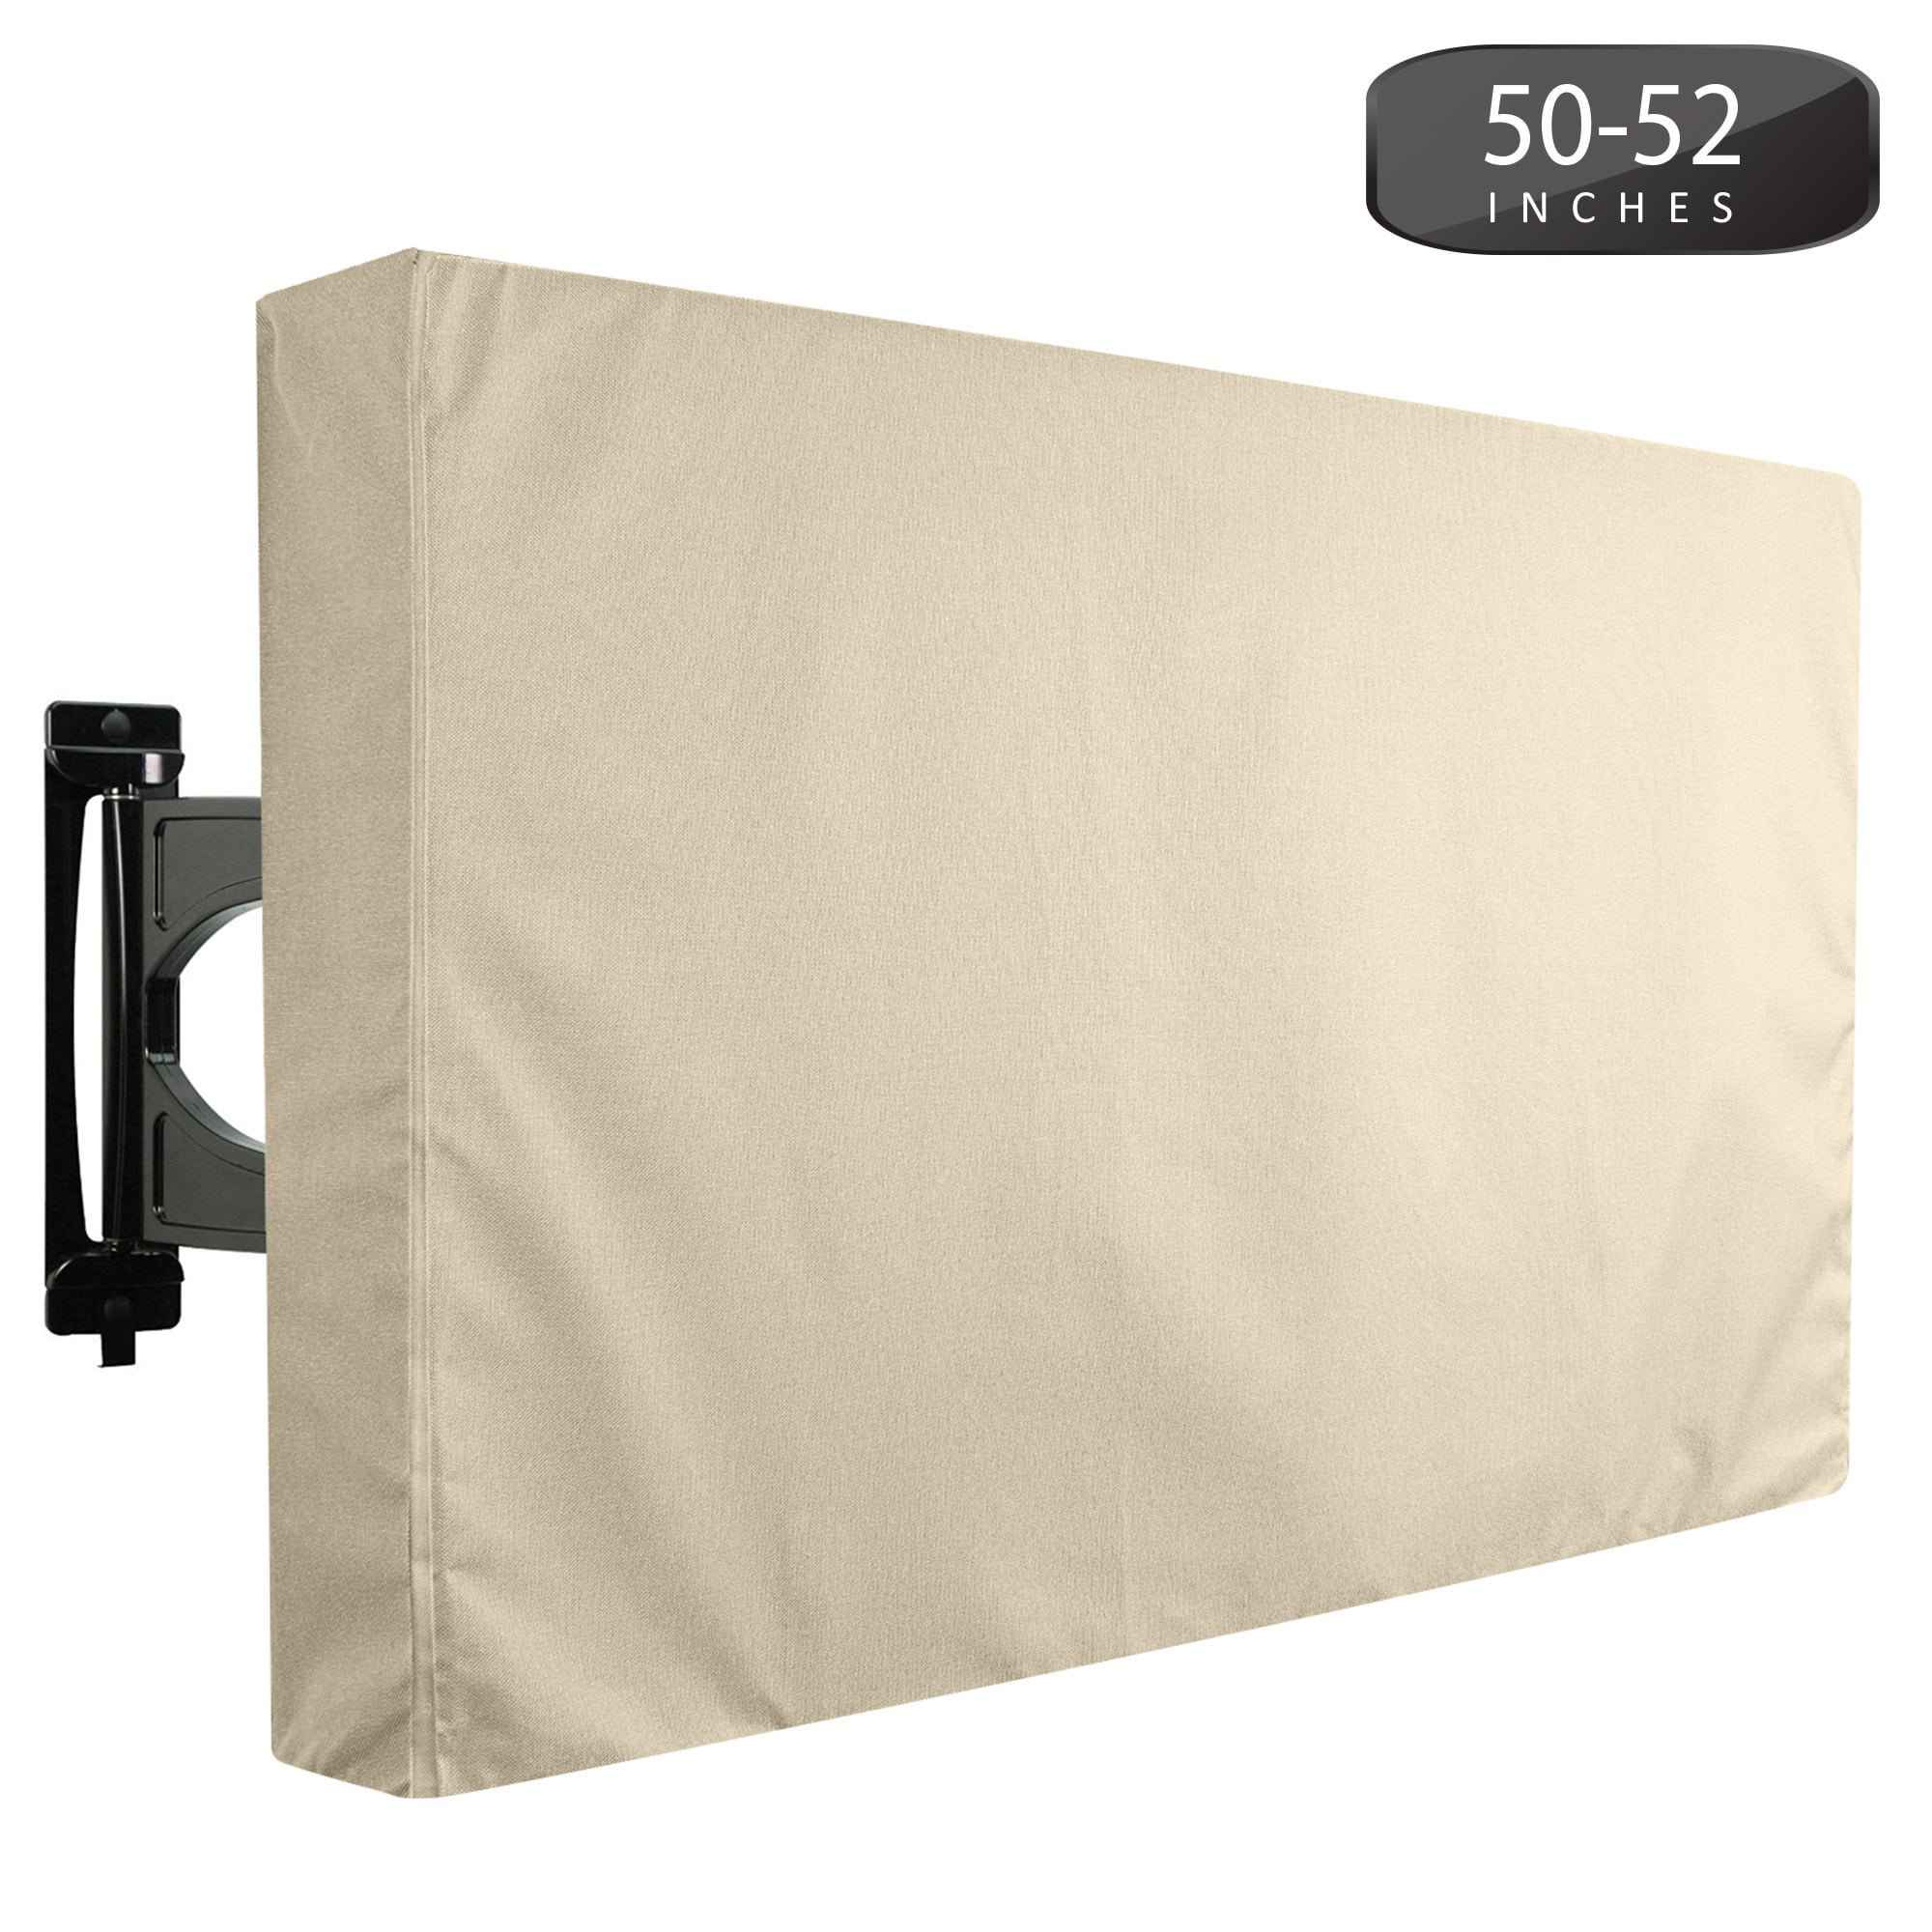 Outdoor Tv Cover 50 To 52 Inches, Outdoor Tv Cover 50 Inch